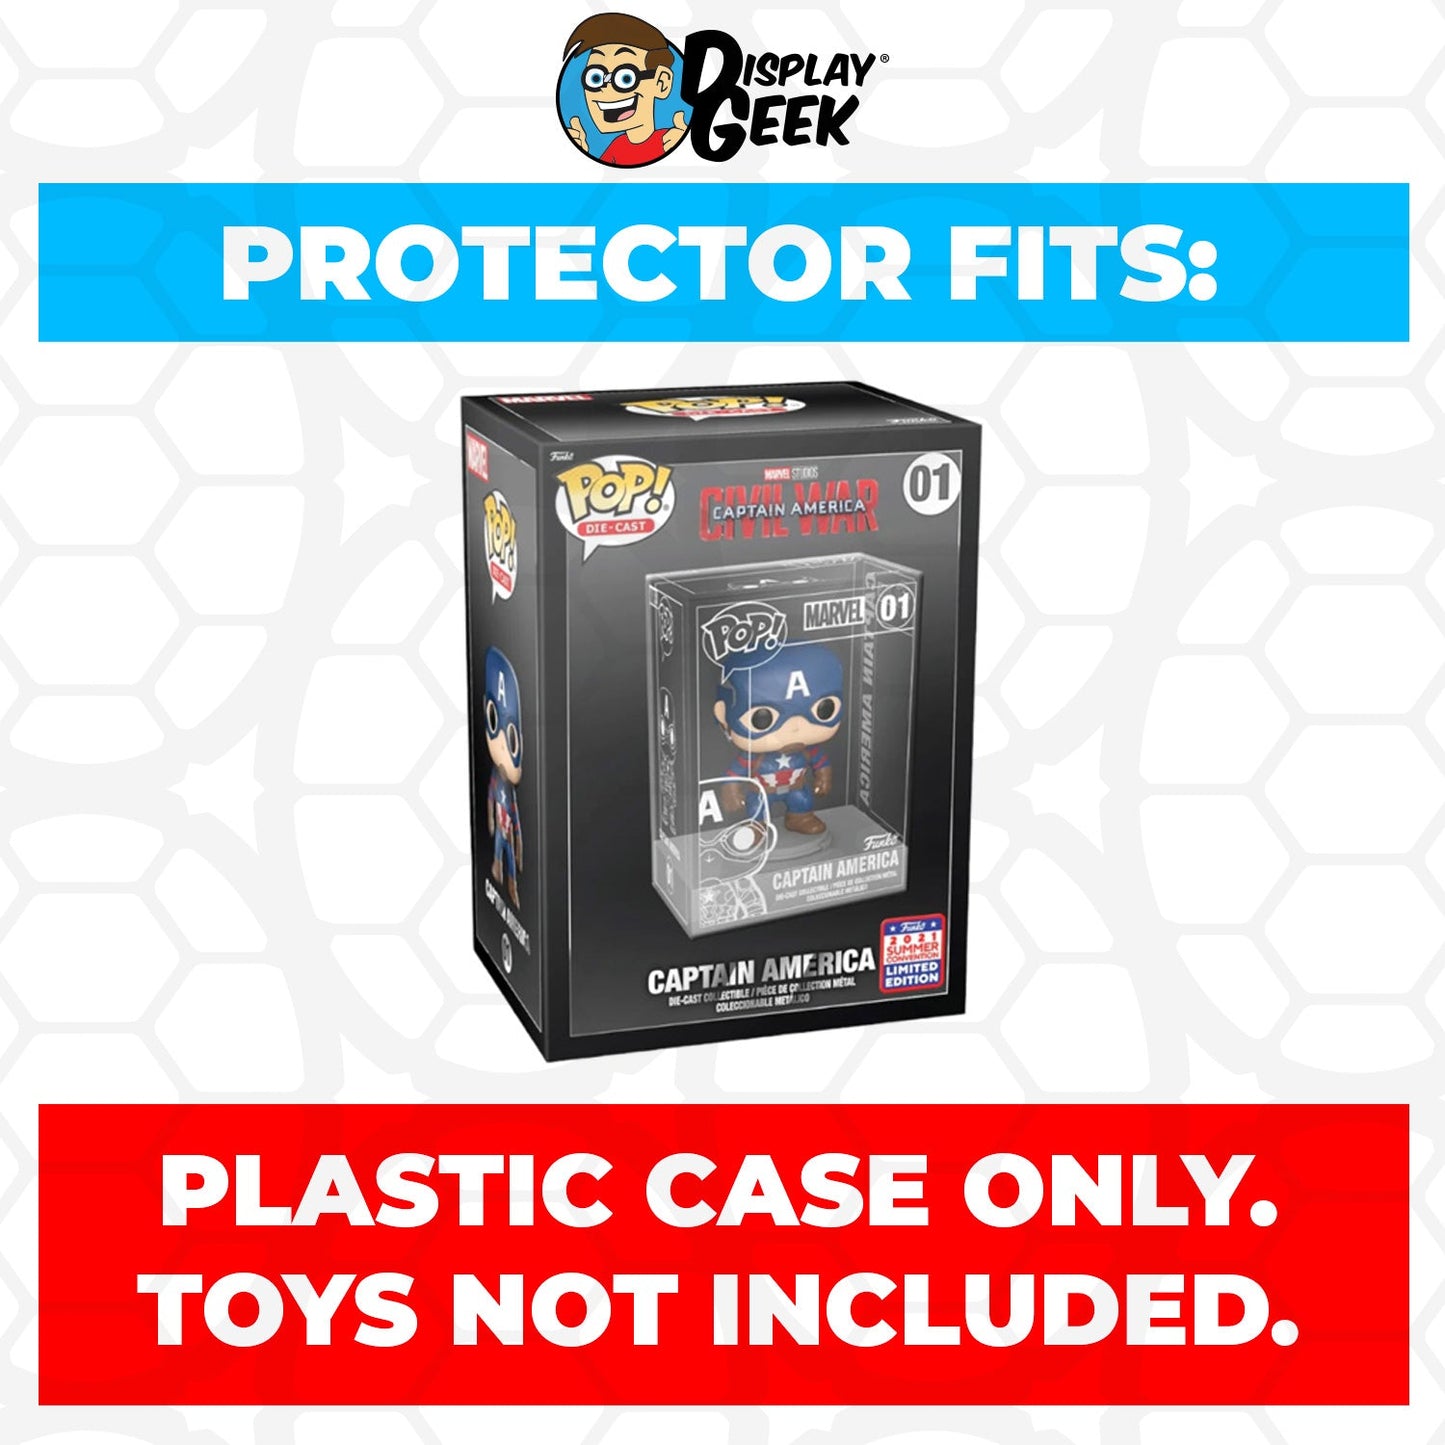 Pop Protector for Captain America FunKon #01 Funko Pop Die-Cast Outer Box - PPG Pop Protector Guide Search Created by Display Geek